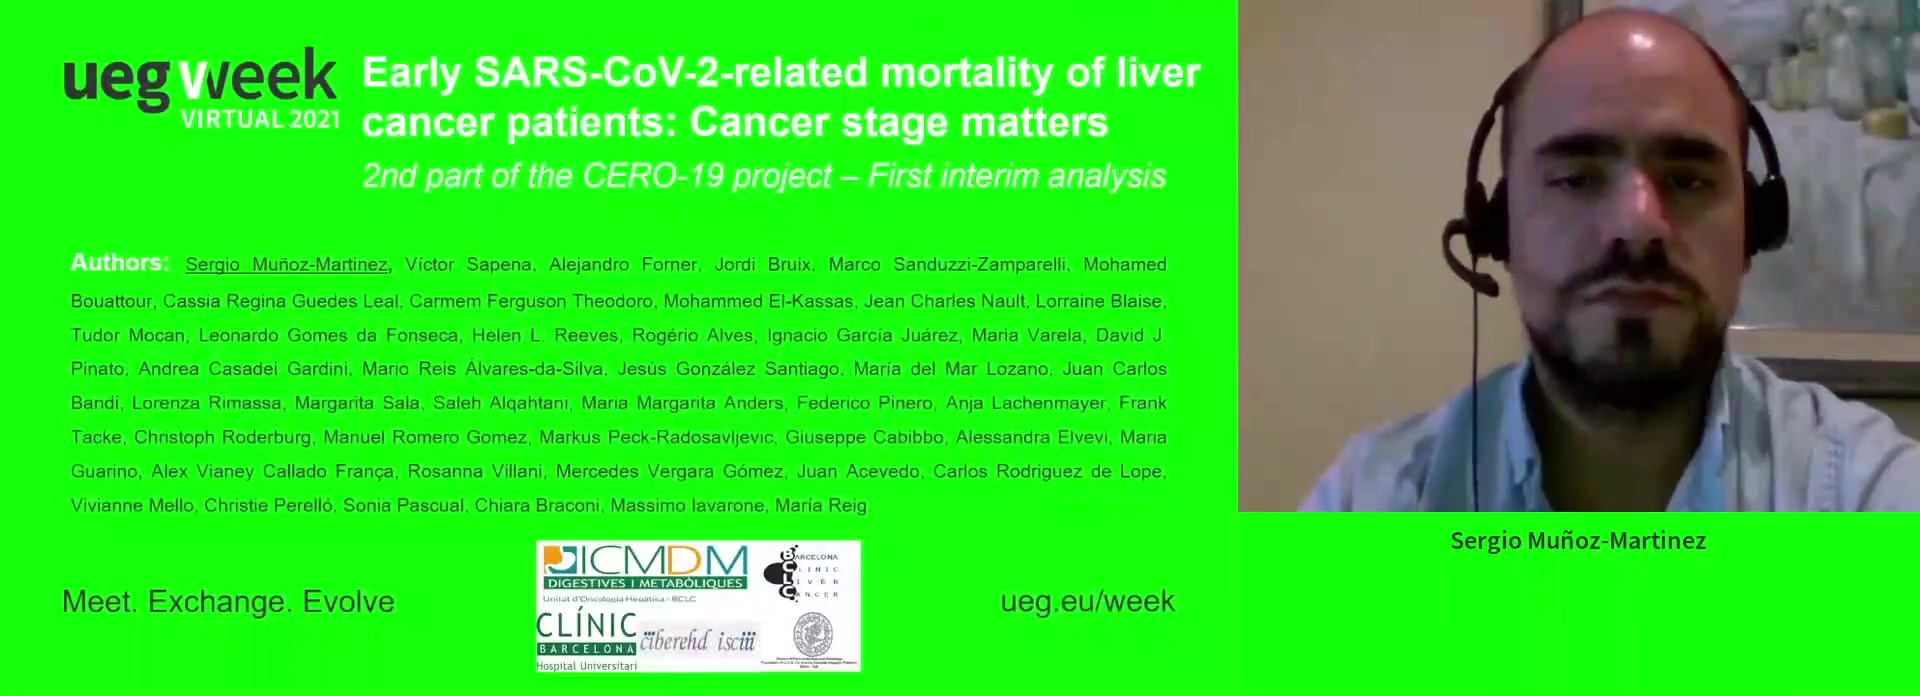 EARLY SARS-COV-2-RELATED MORTALITY OF LIVER CANCER PATIENTS: CANCER STAGE MATTERS